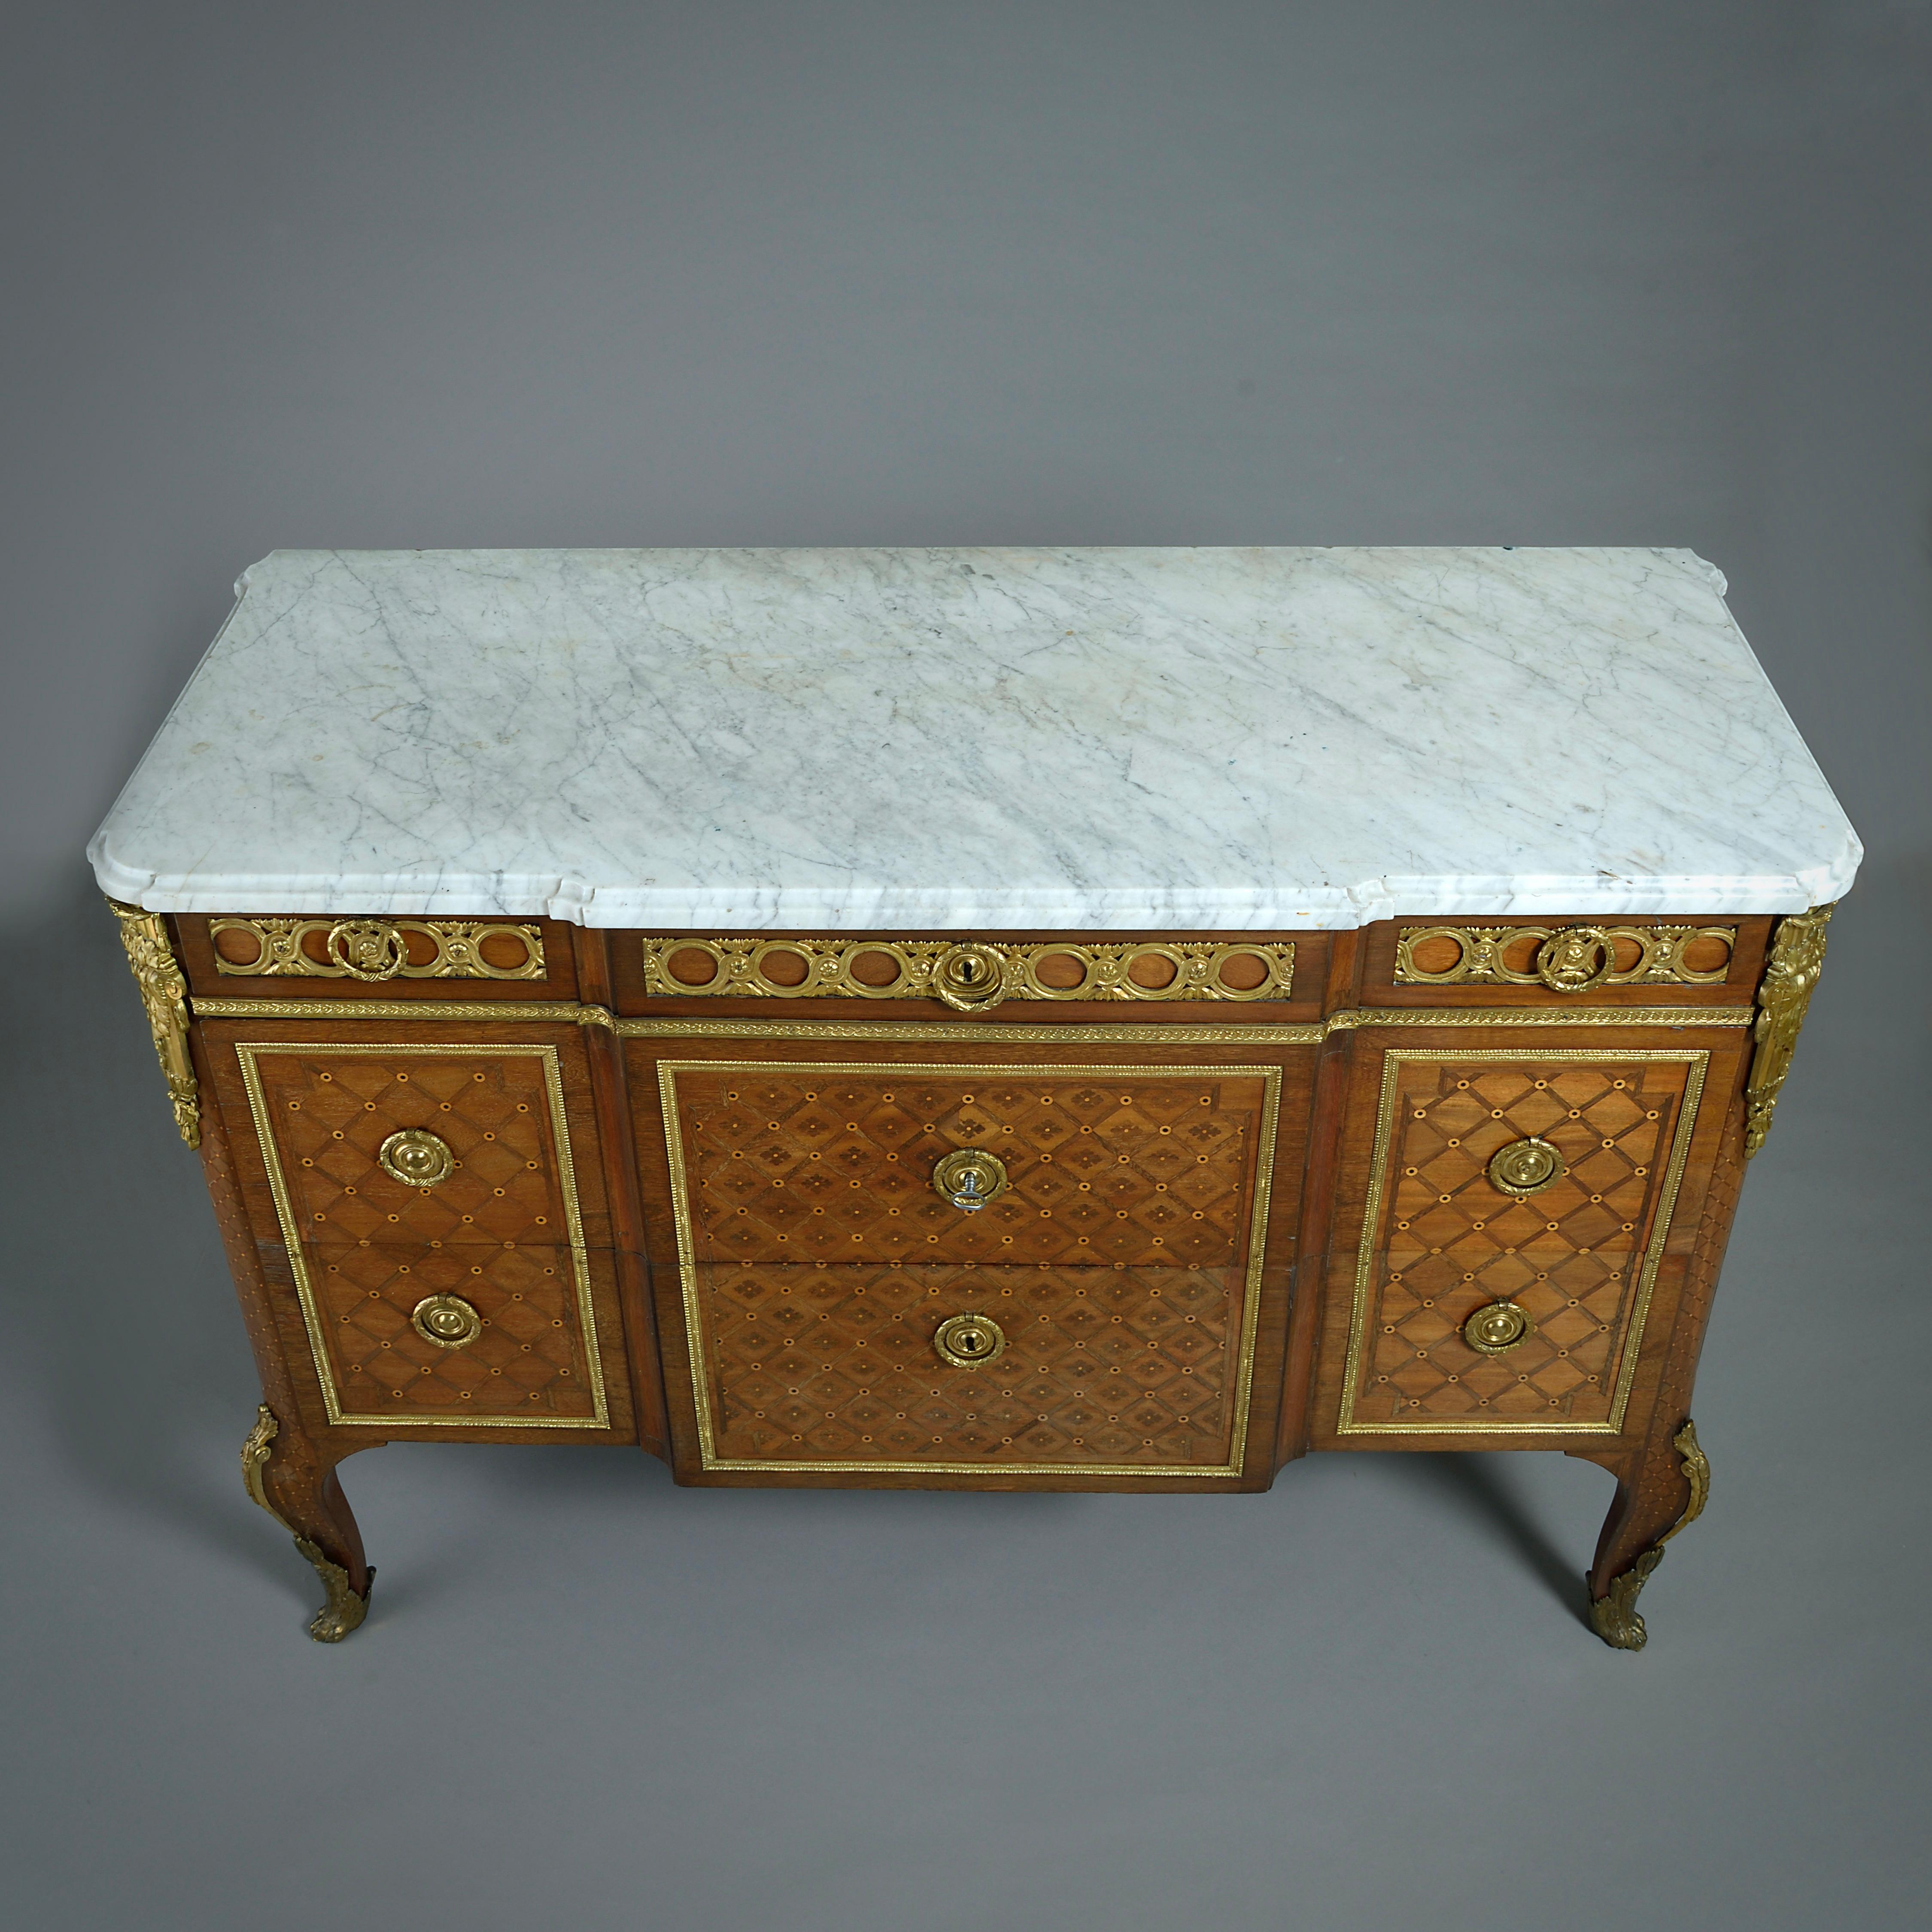 Ormolu The Longleat Commodes For Sale